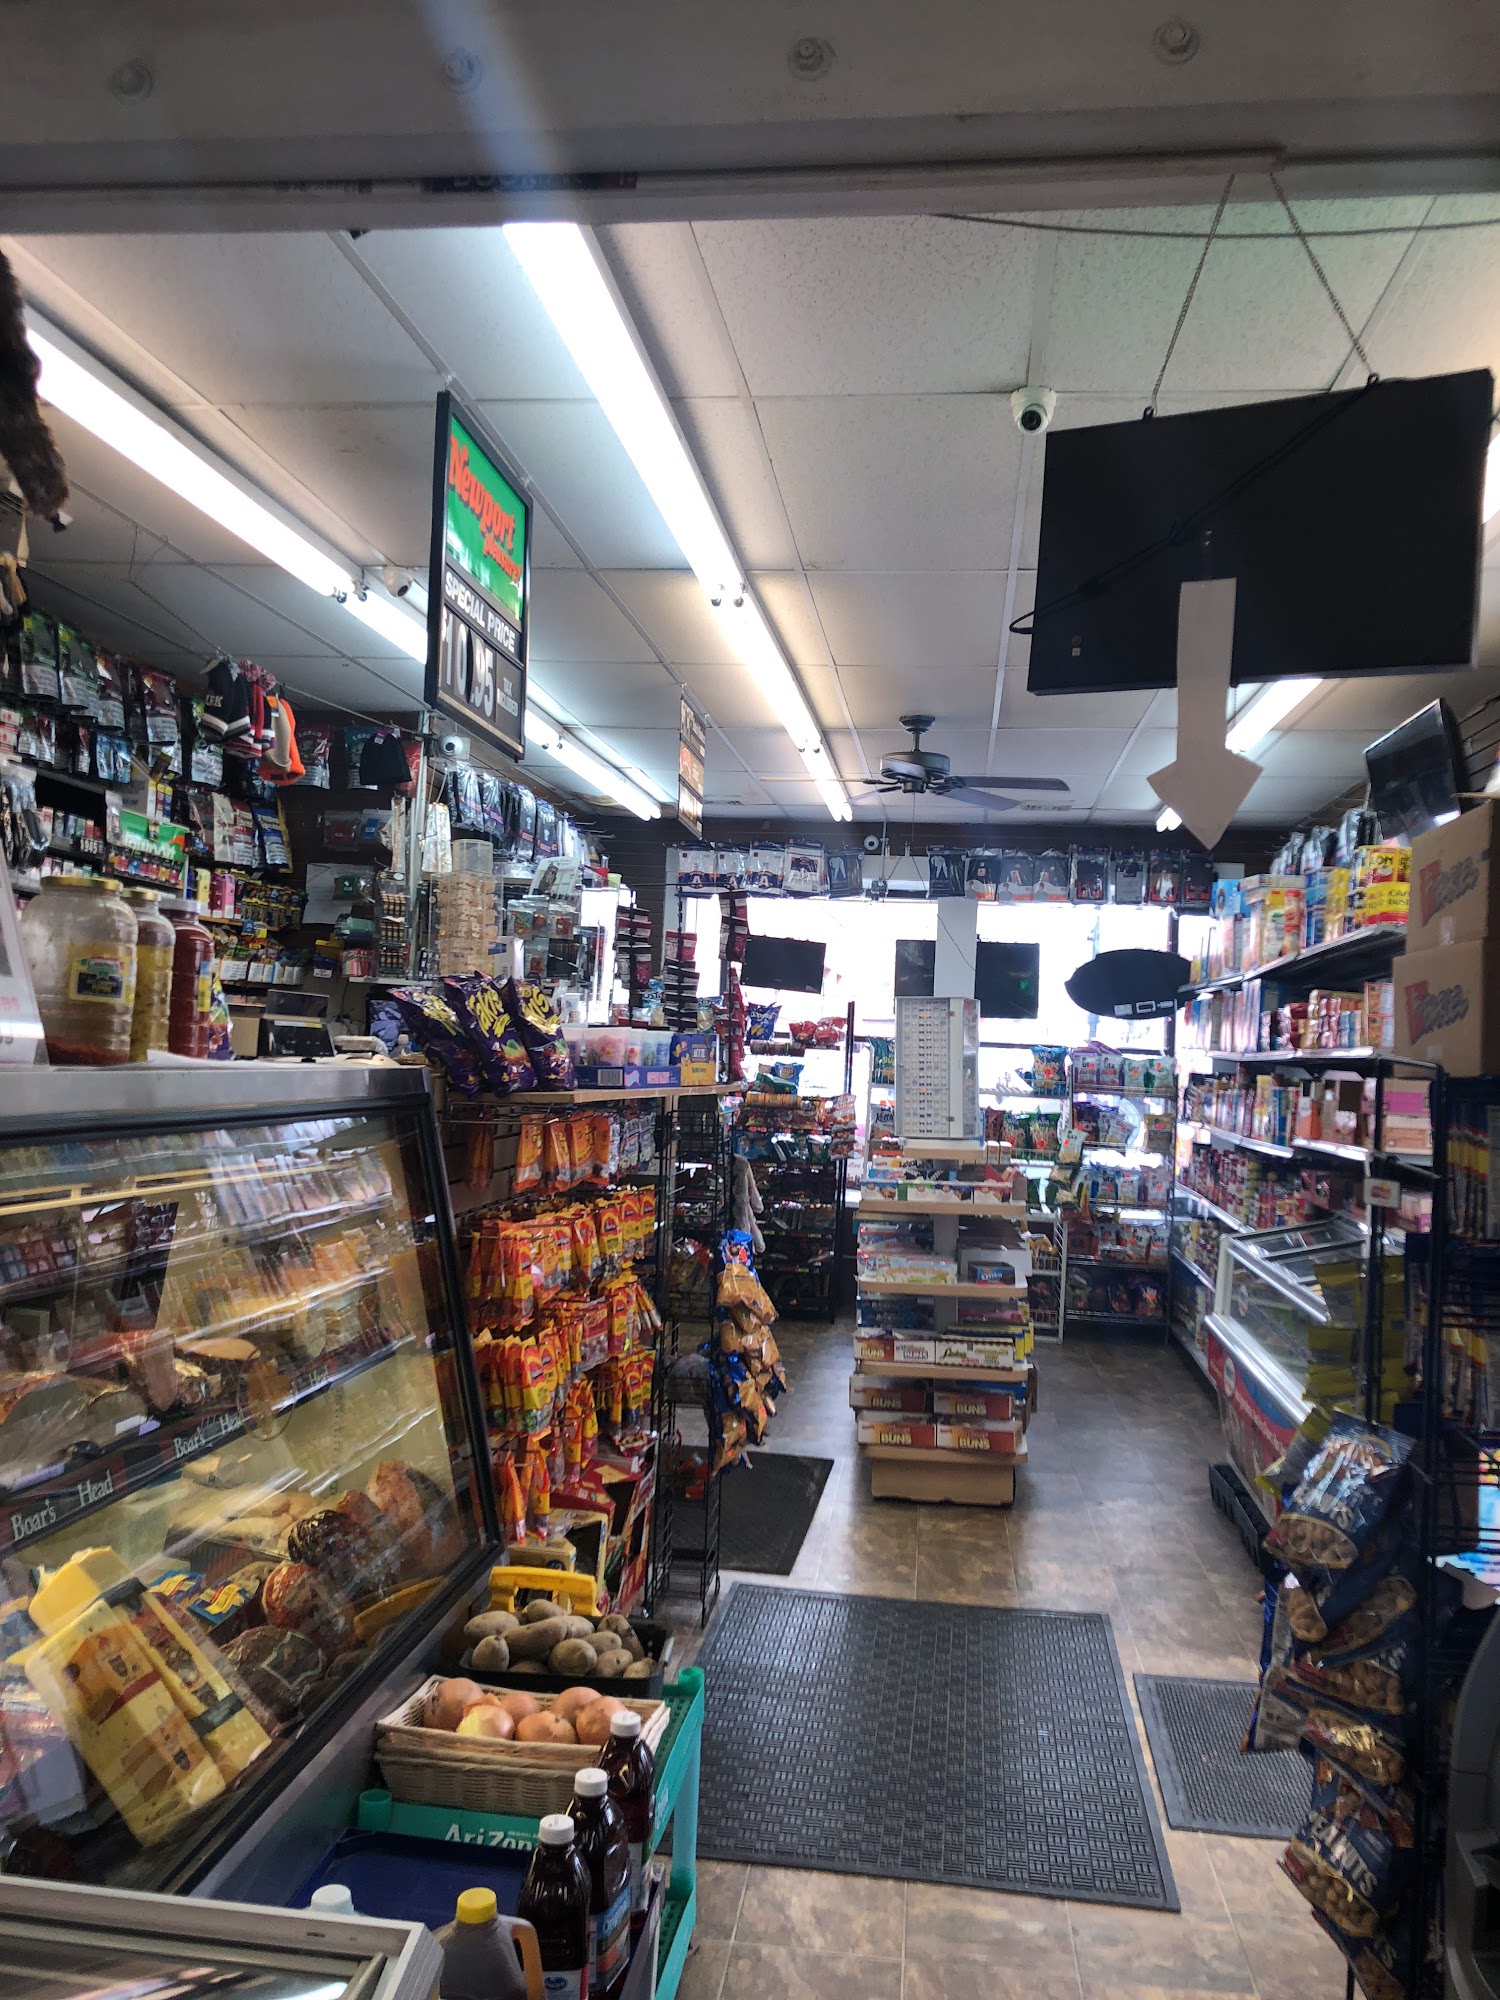 Jefferson Street Deli and Grocery